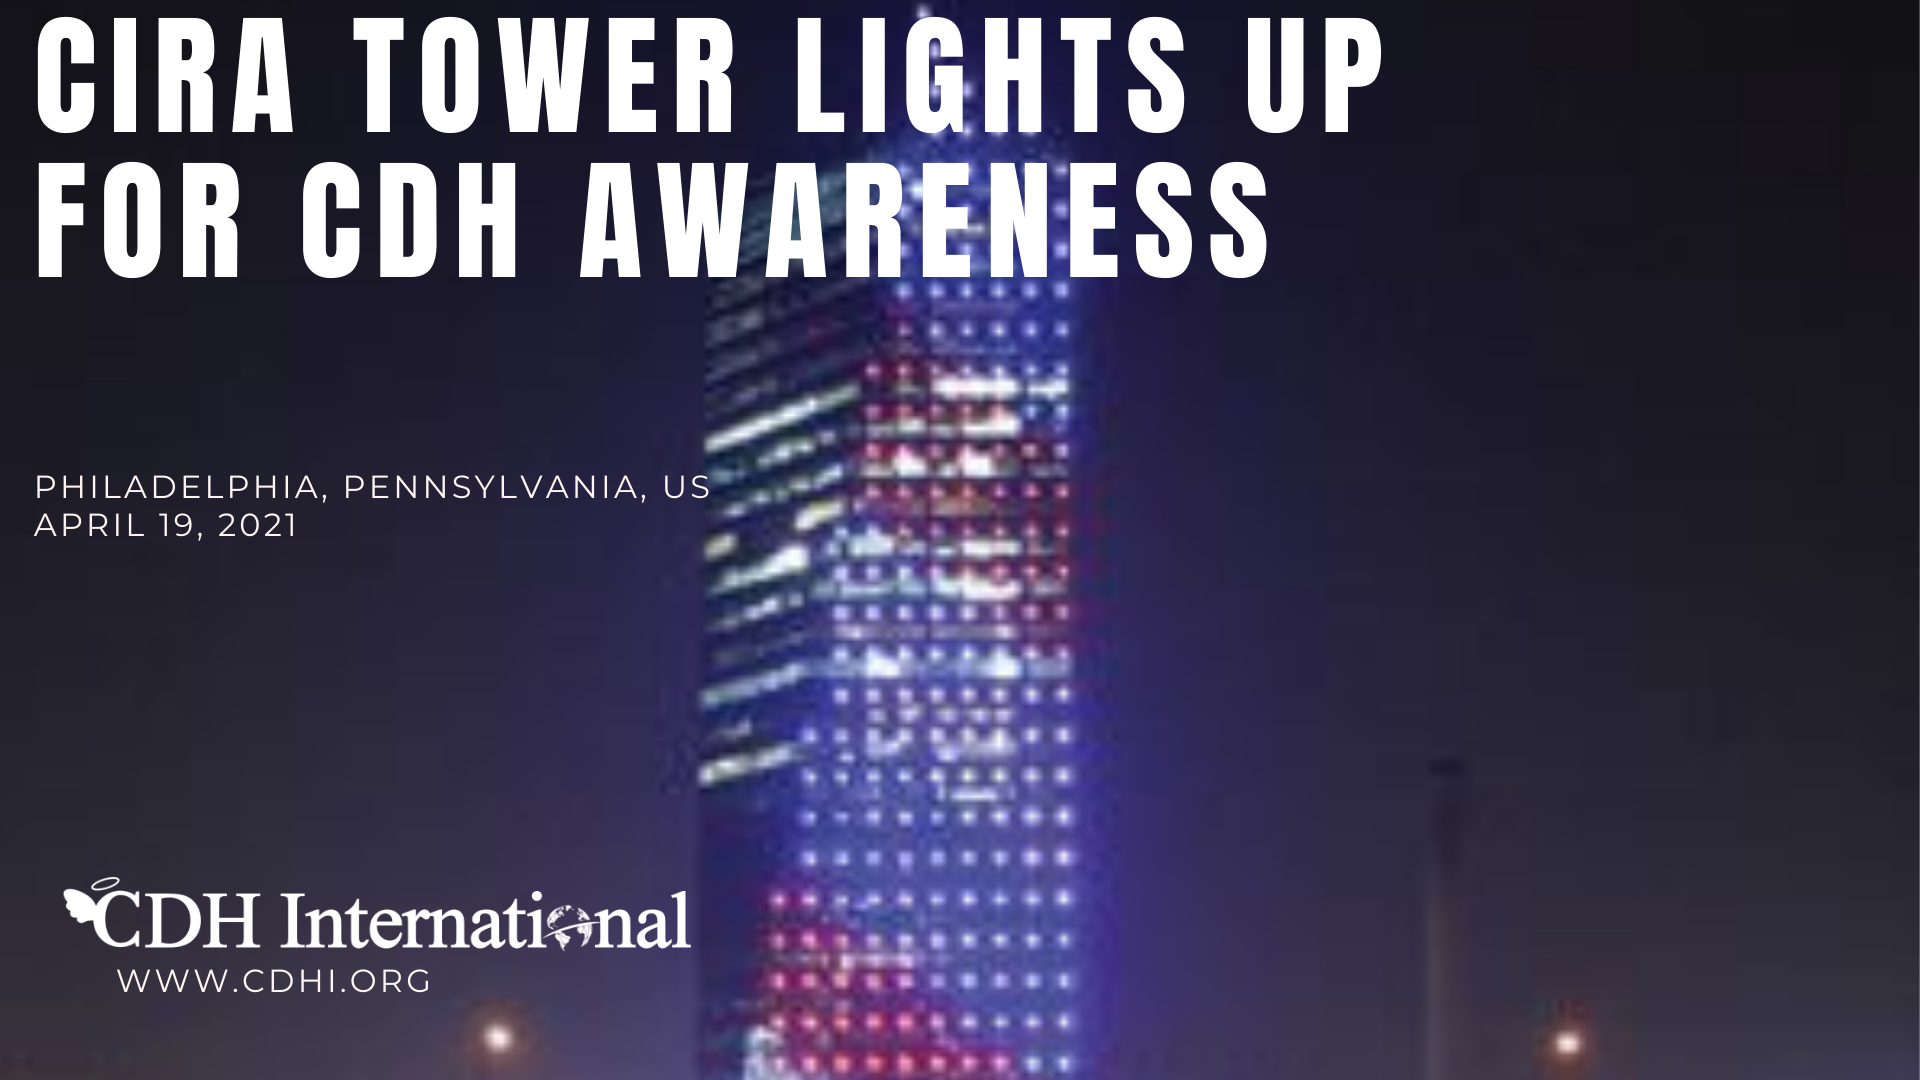 One Liberty Lights Up For CDH Awareness